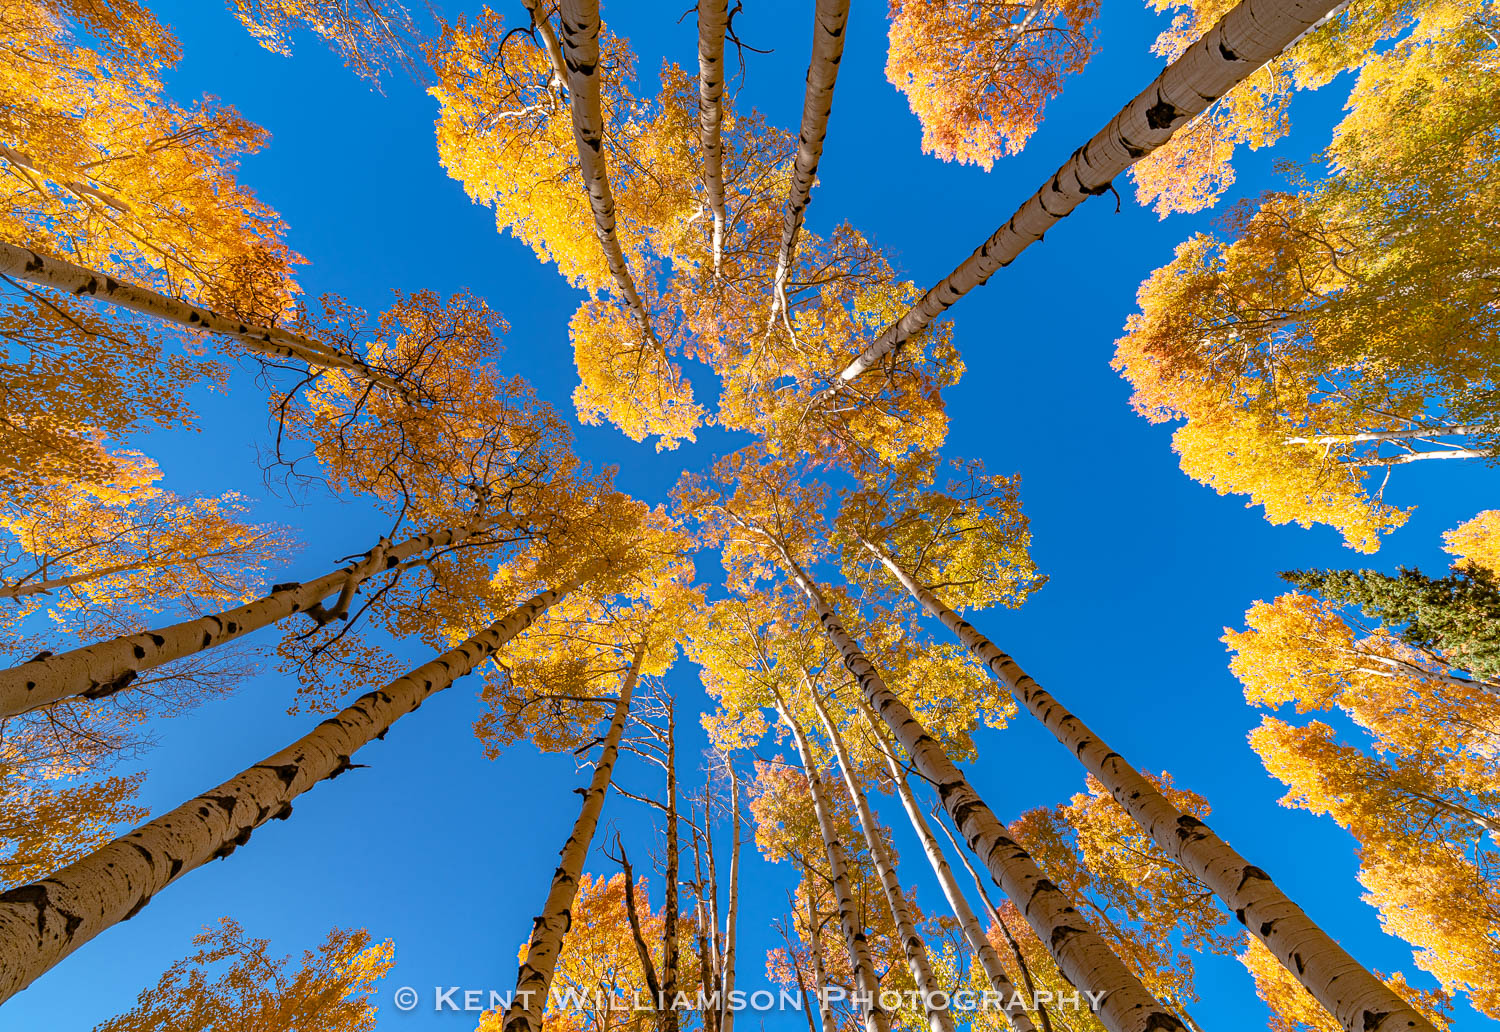 I captured this image during a hiking trip through Uncompahgre Wilderness in Autumn of 2019.